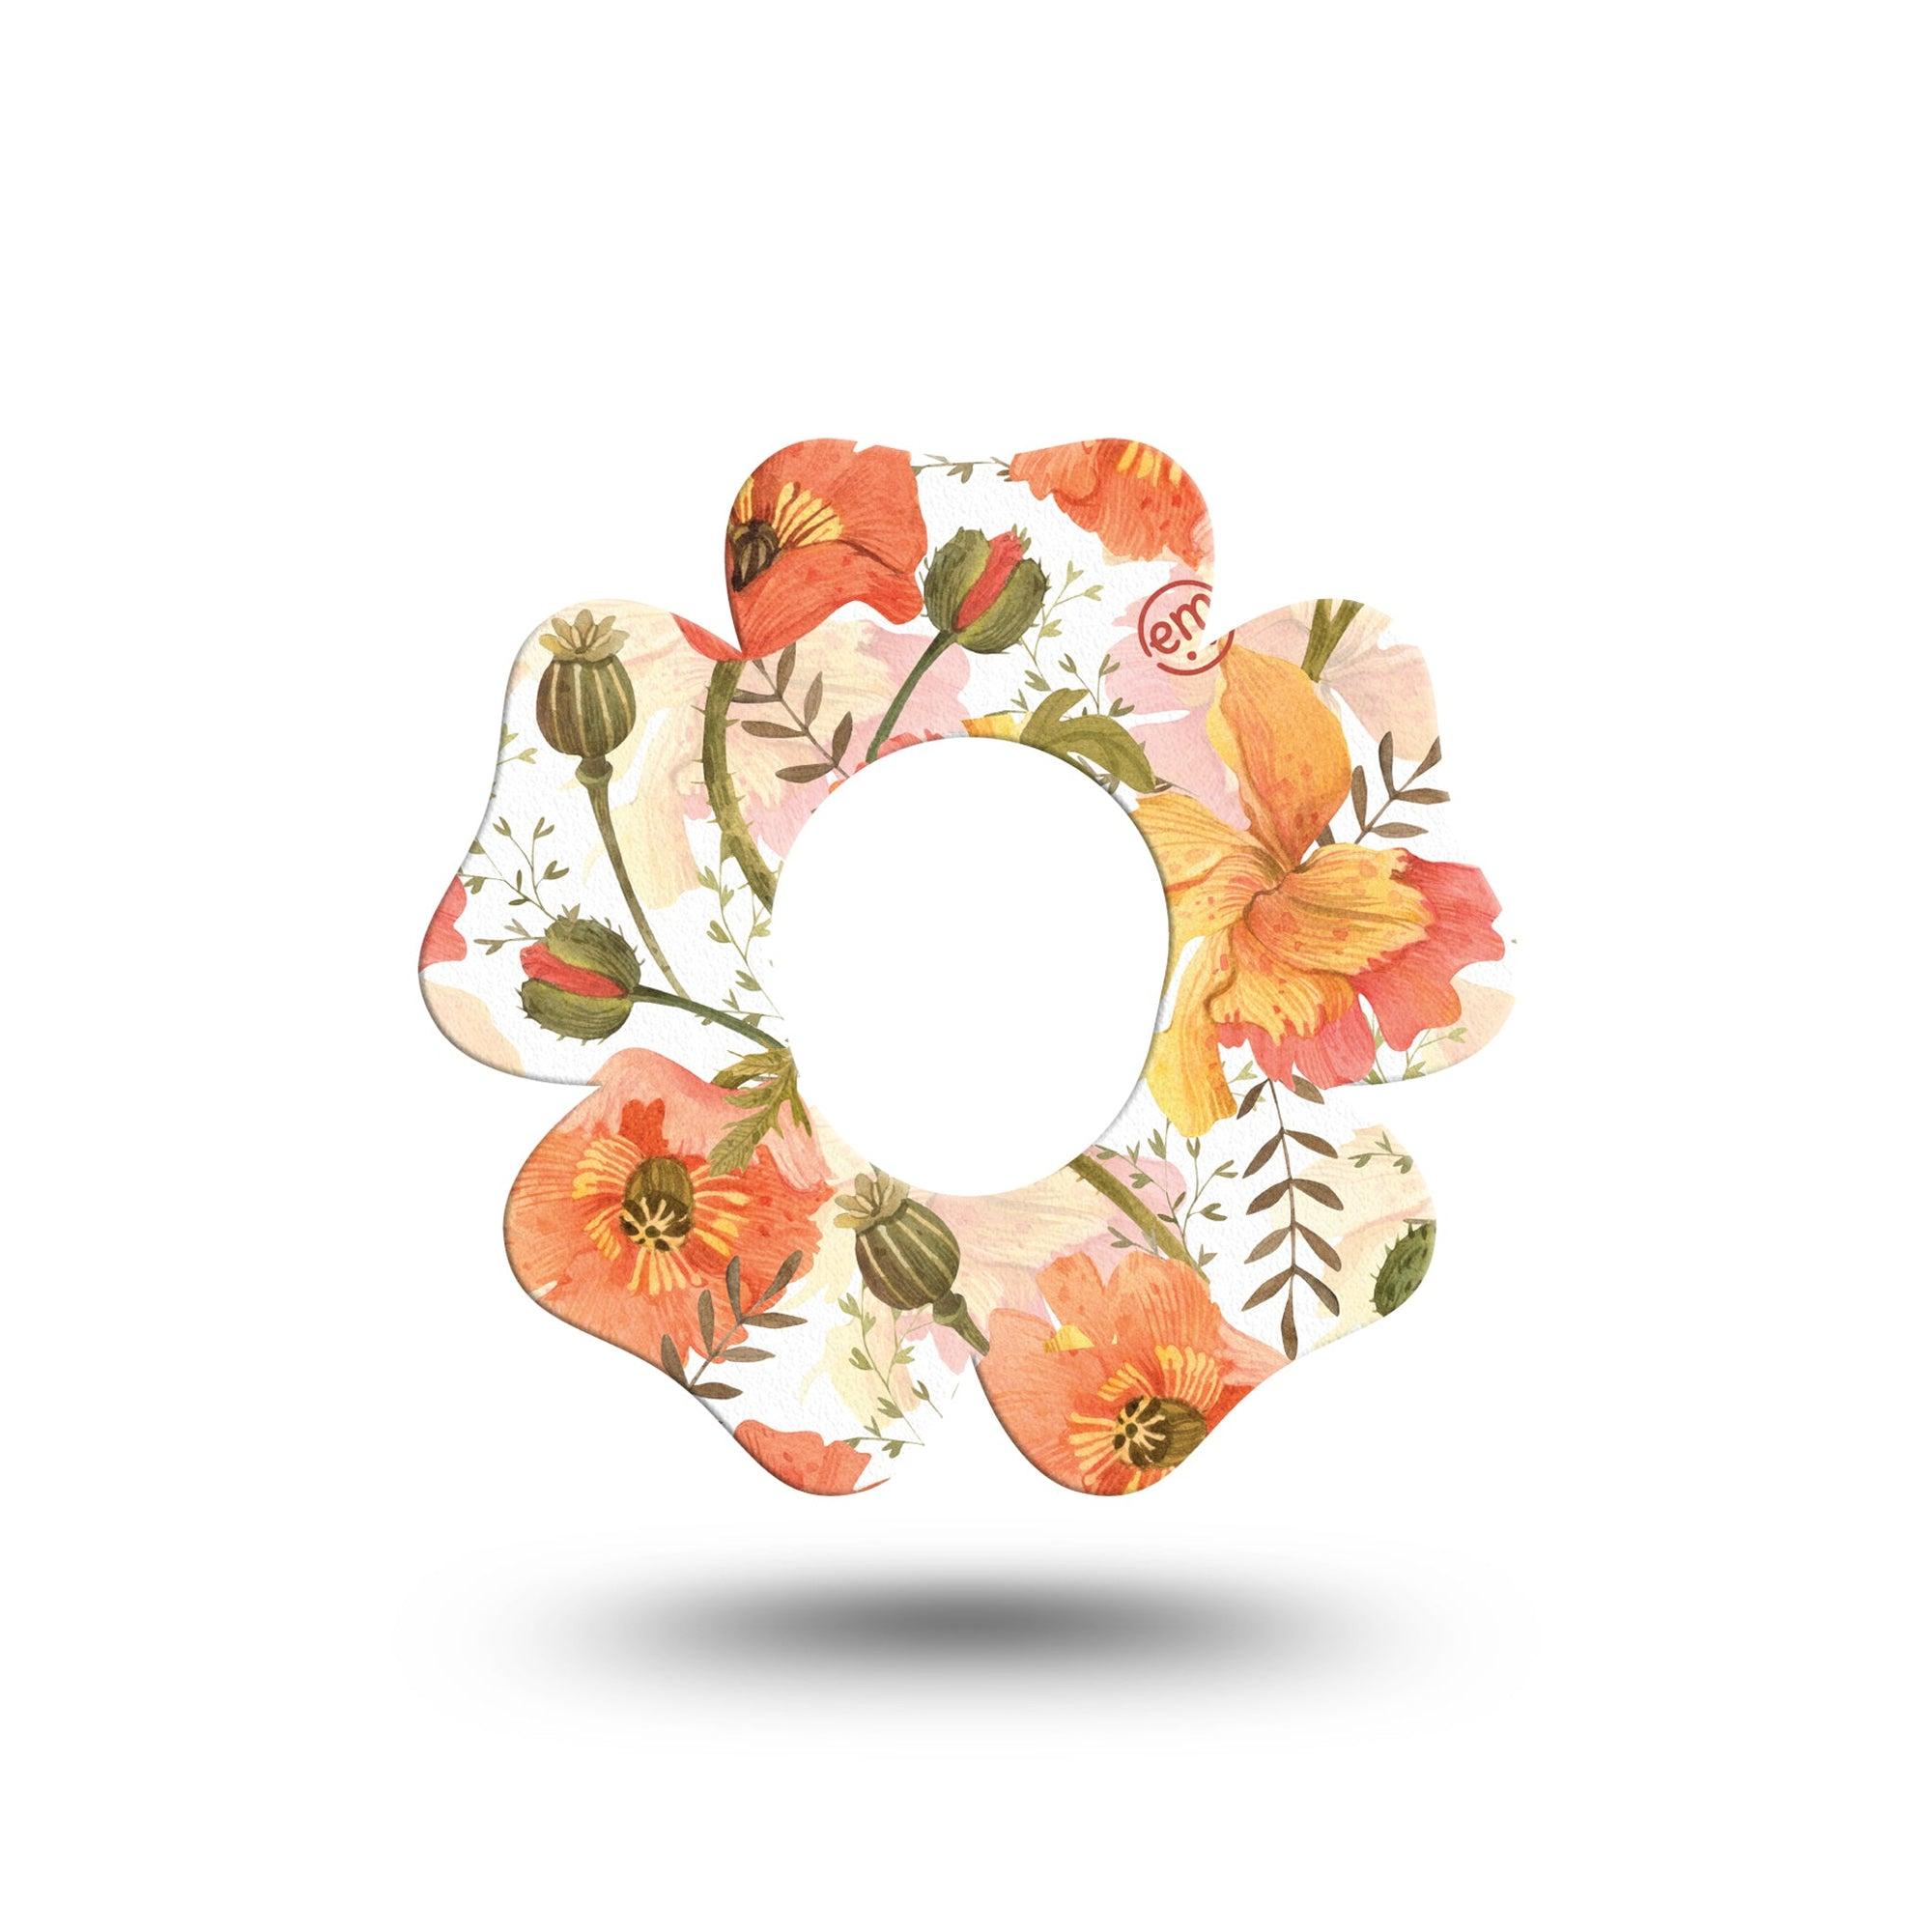 ExpressionMed Peachy Blooms Flower Dexcom G7 Tape, Single, Tropical Flower Inspired, CGM Plaster Patch Design